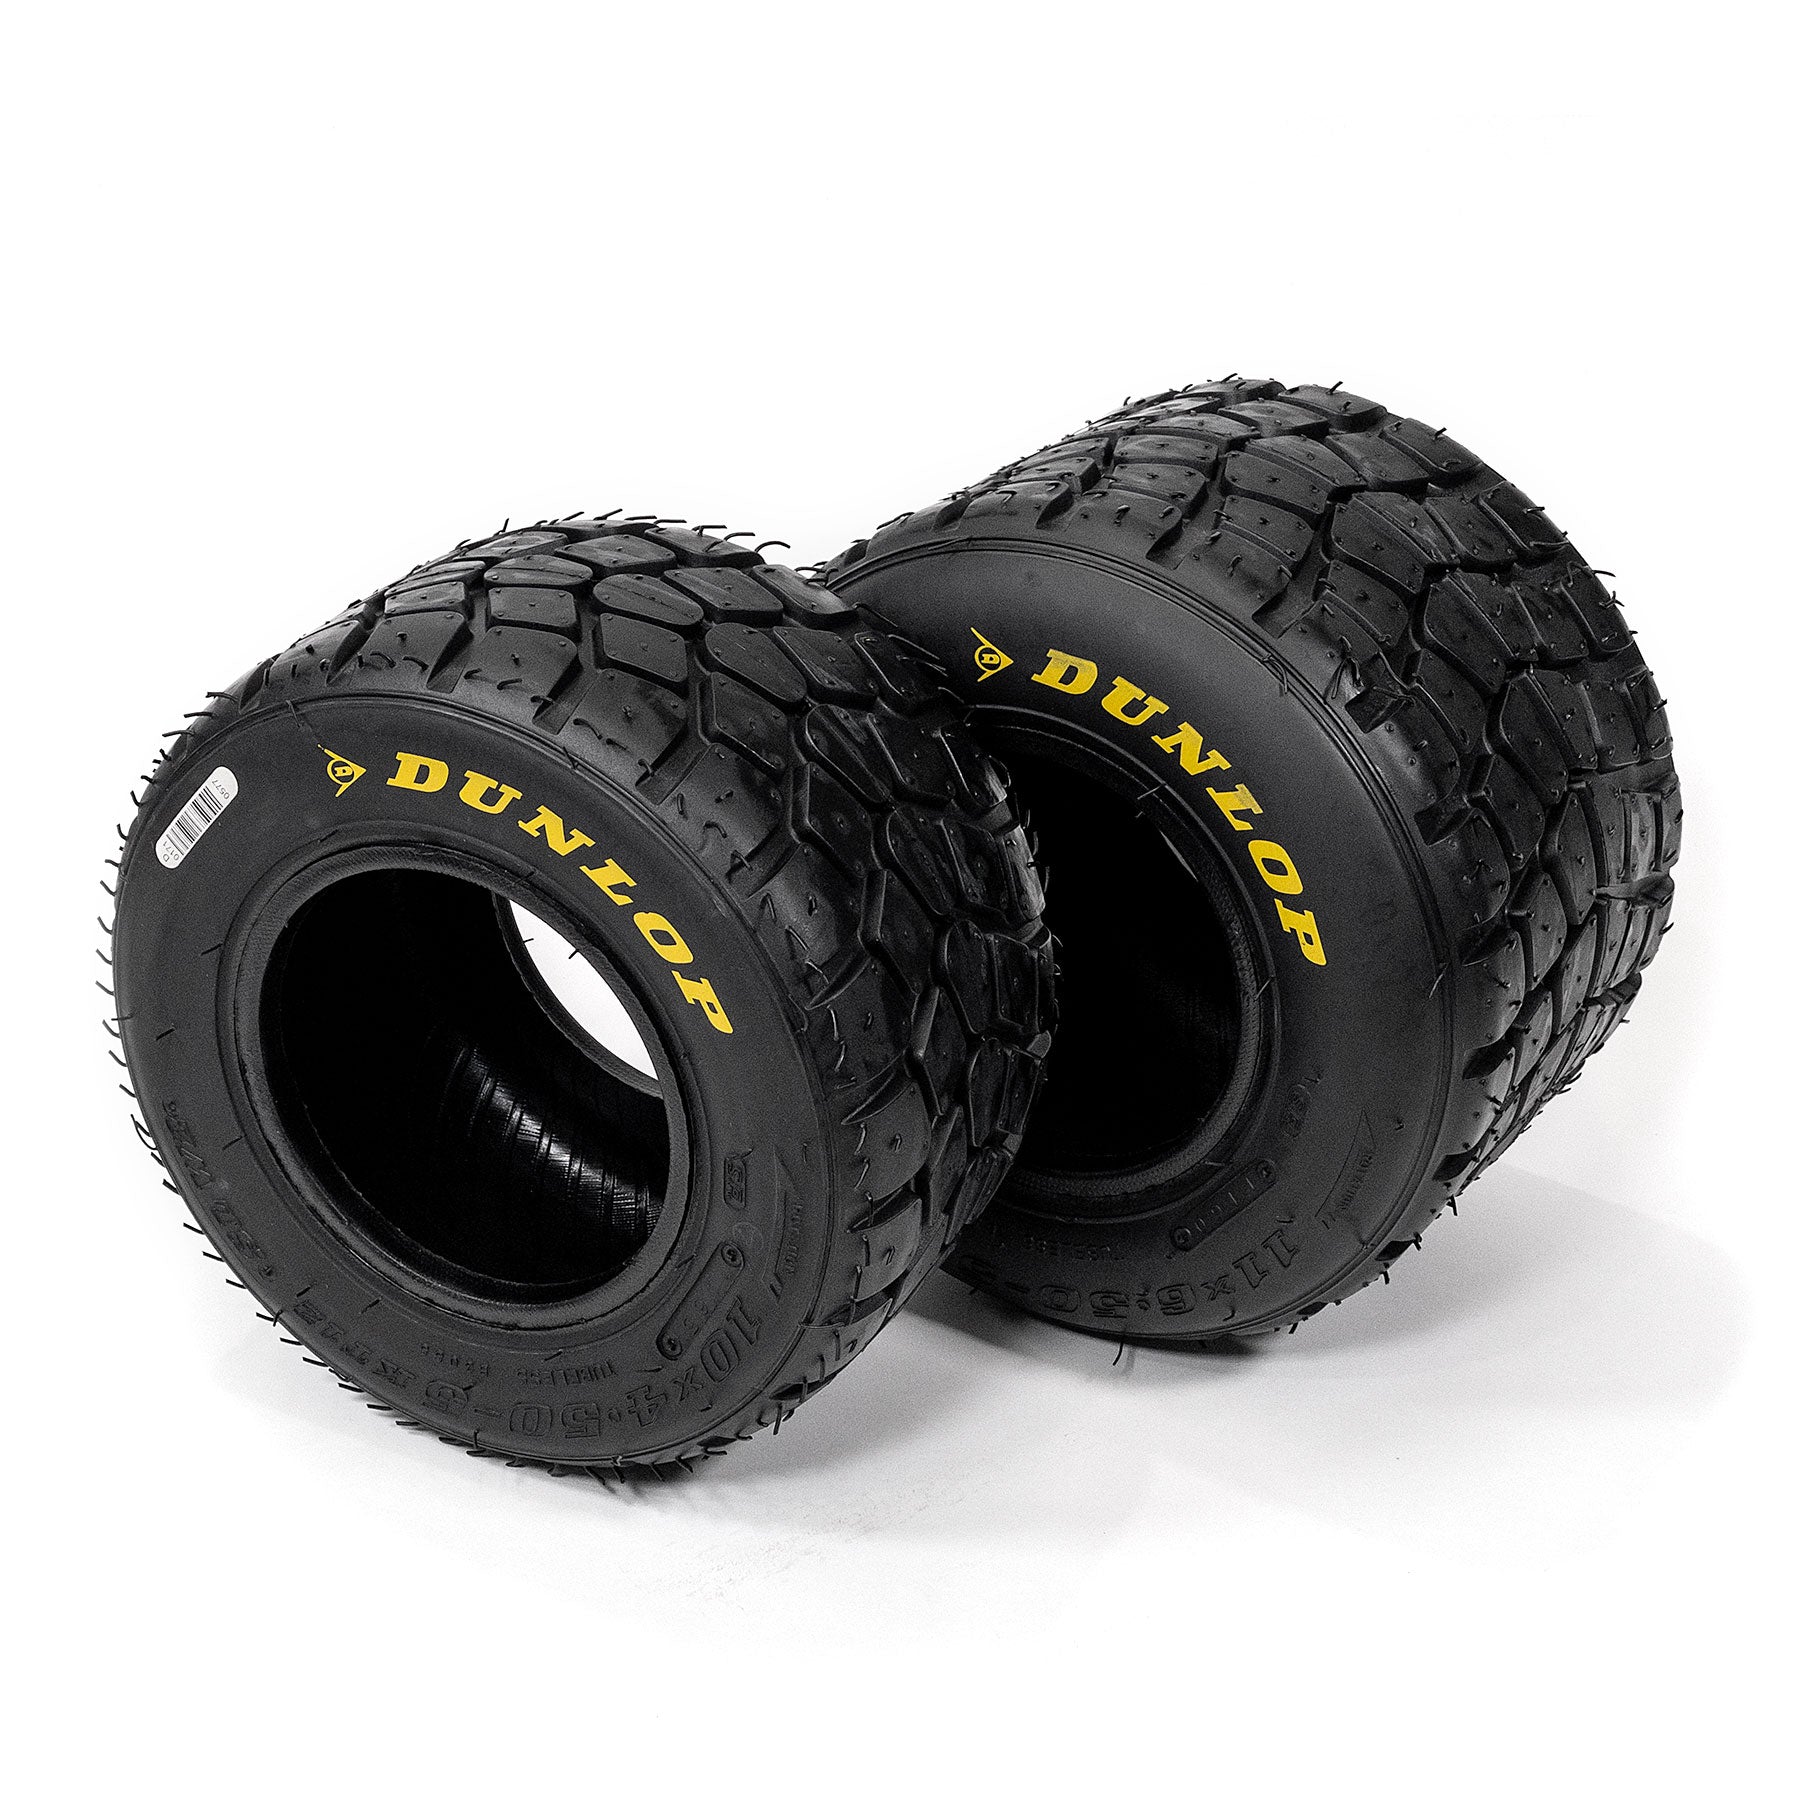 Dunlop Wet Tyres for use in KNSW competition